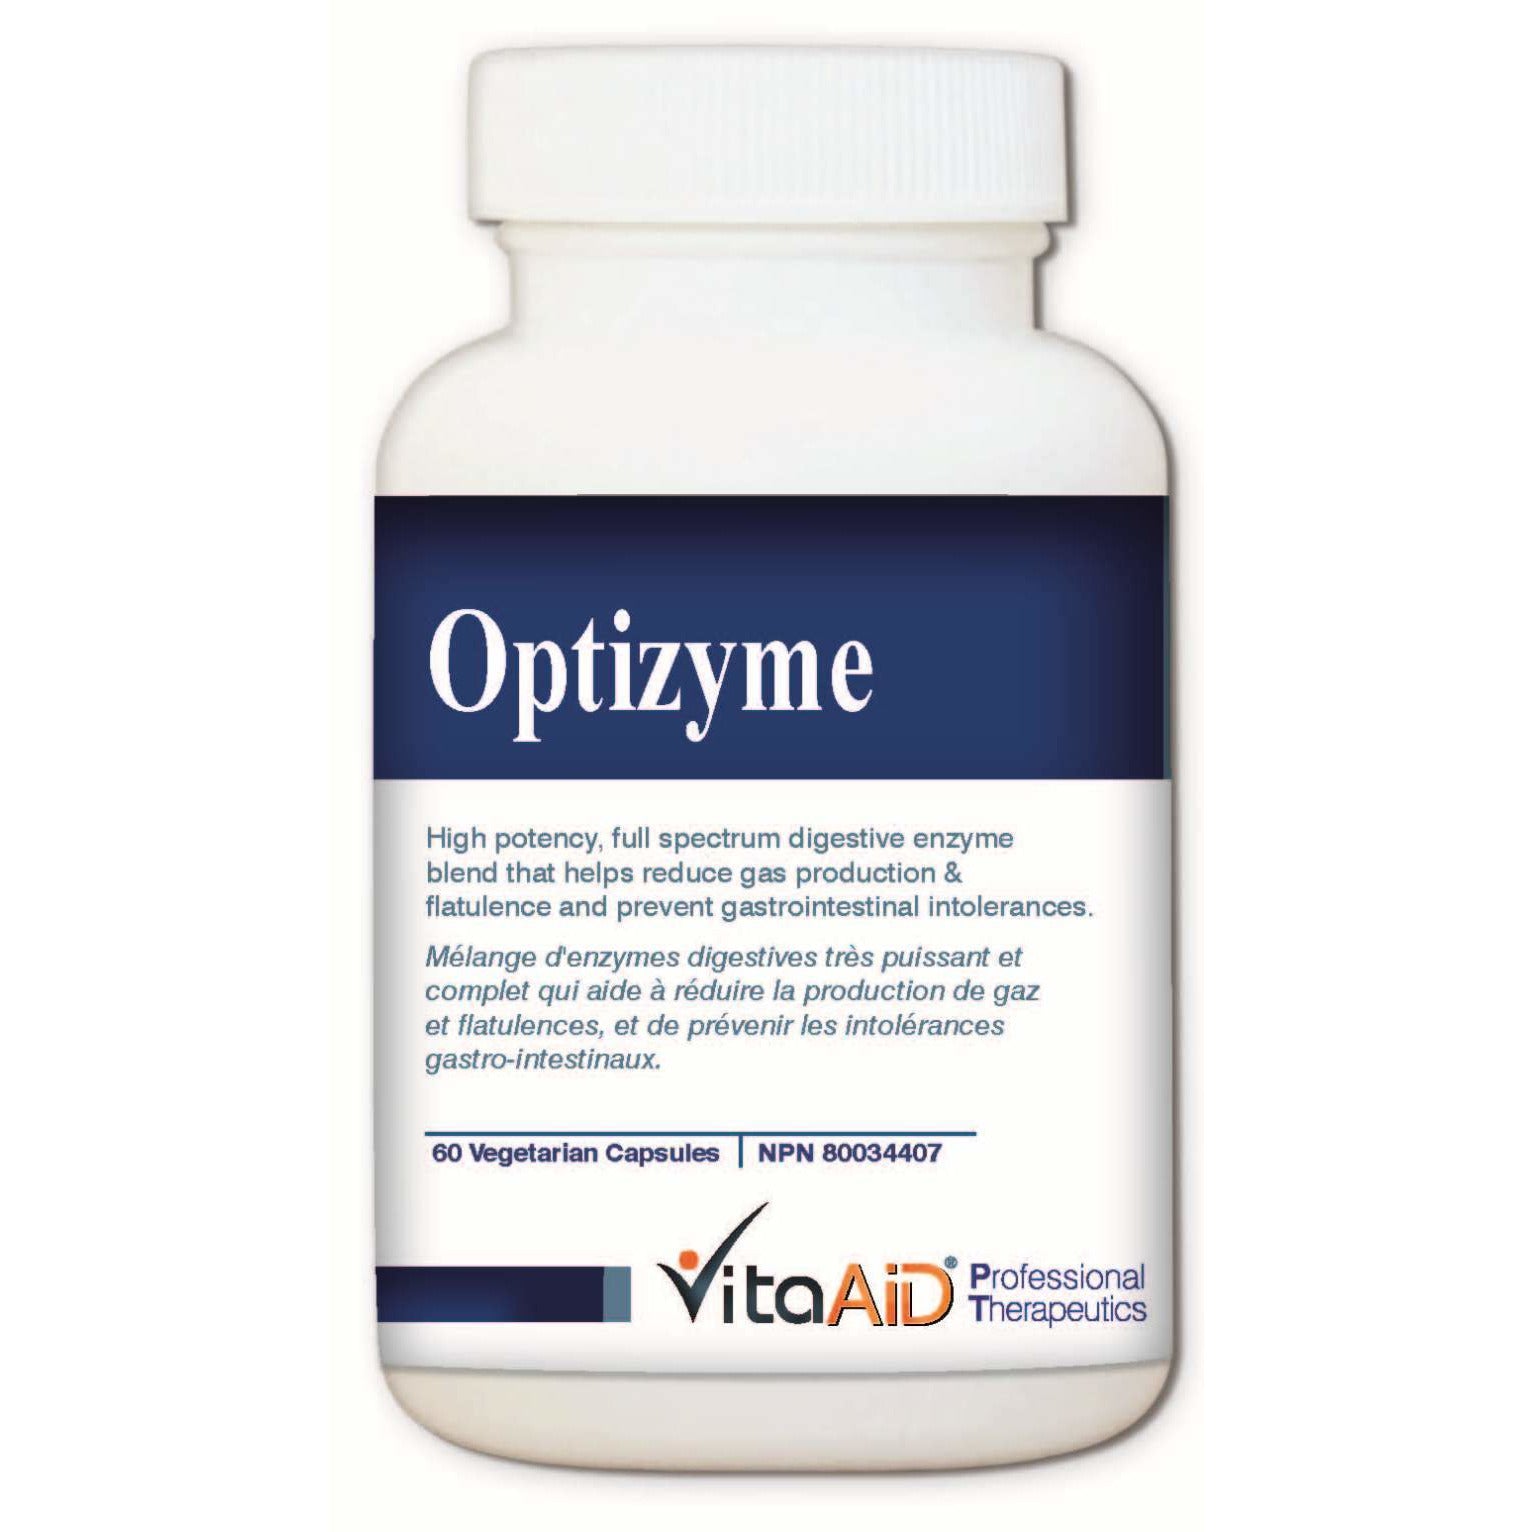 Optizyme (S)  High Dose, Full Spectrum of Digestive Enzymes 60 veg caps